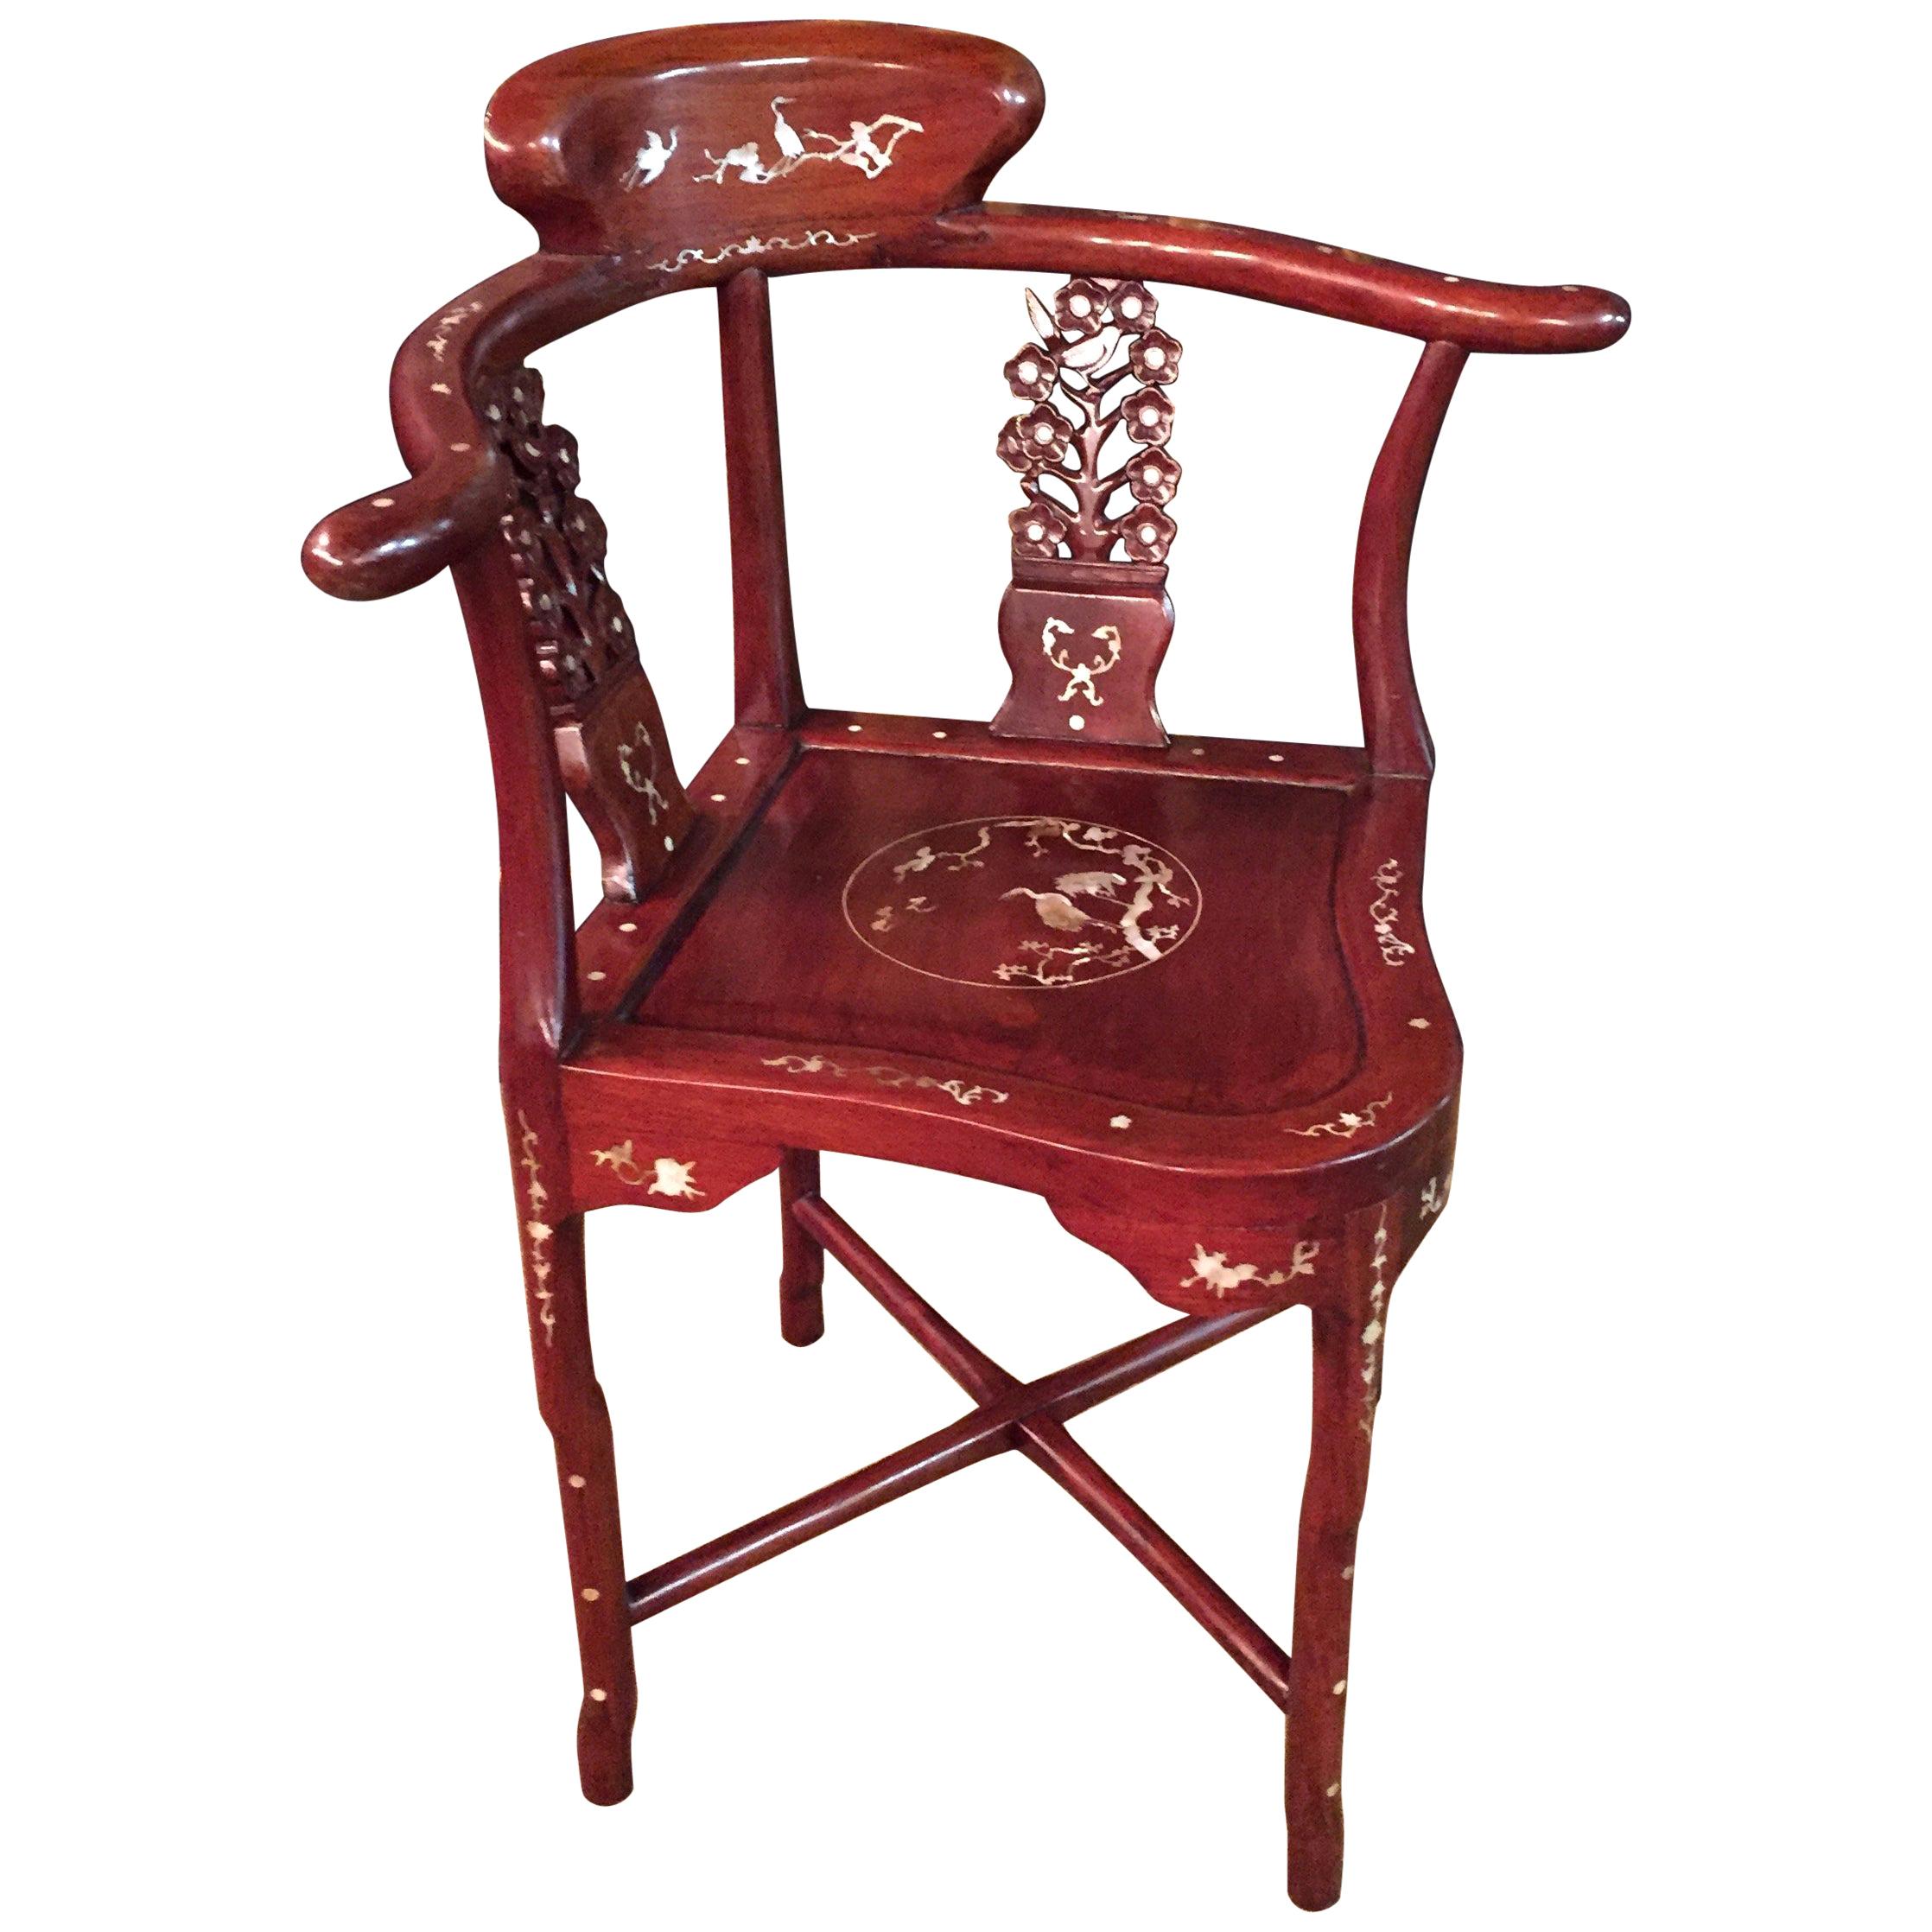 China Corner Chair antique with Mother of Pearl Inlays hardwood 